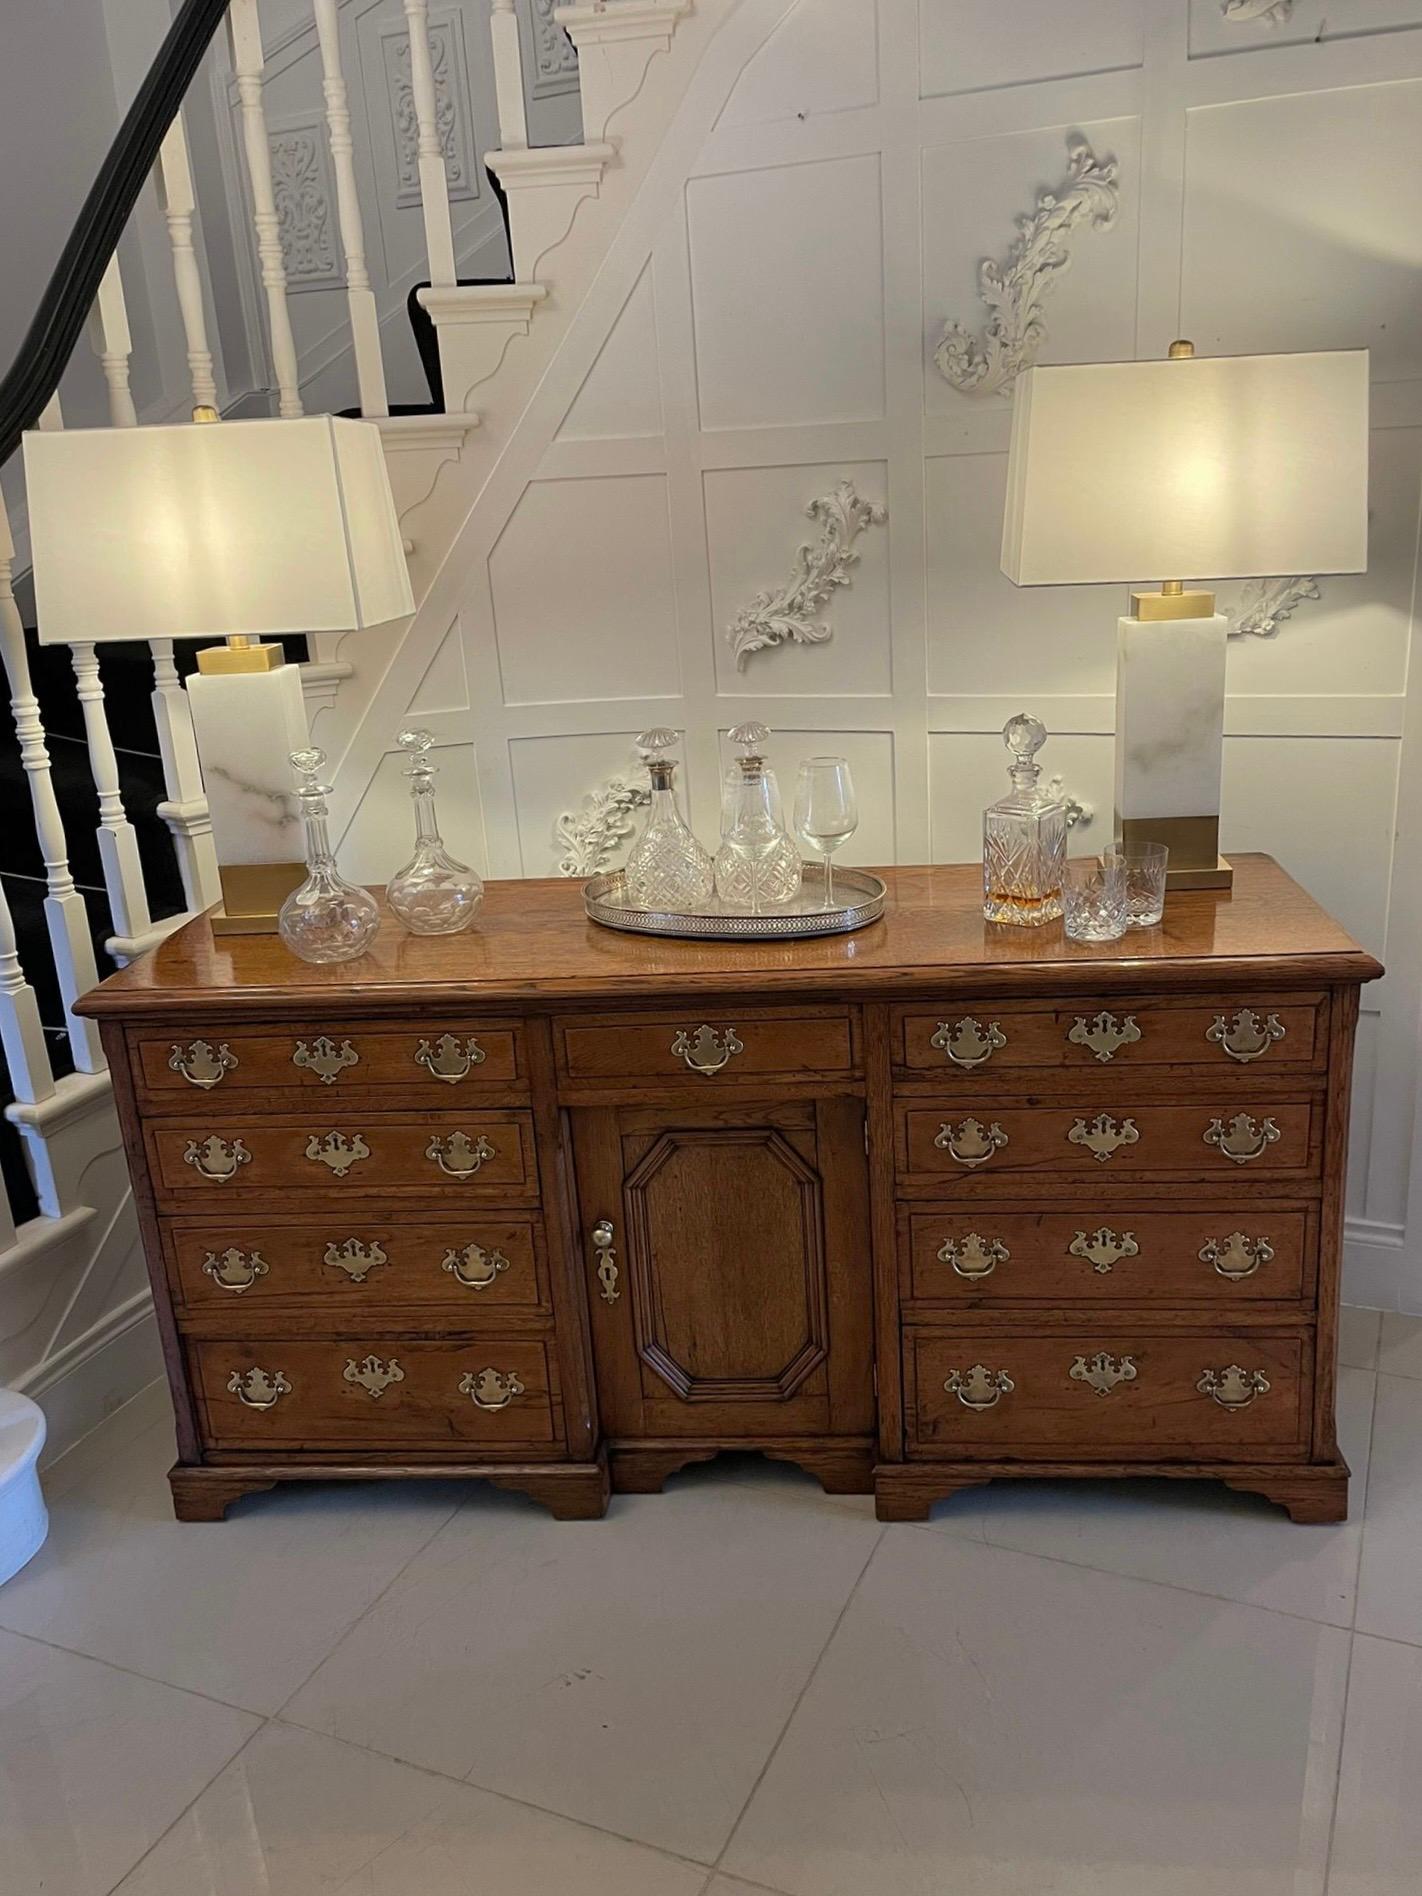 Antique 18th century George III quality oak dresser base with original brass handle & escutcheons having a first class quality oak rectangular shaped top with a moulded edge above nine oak drawers with original brass handles and escutcheons, single